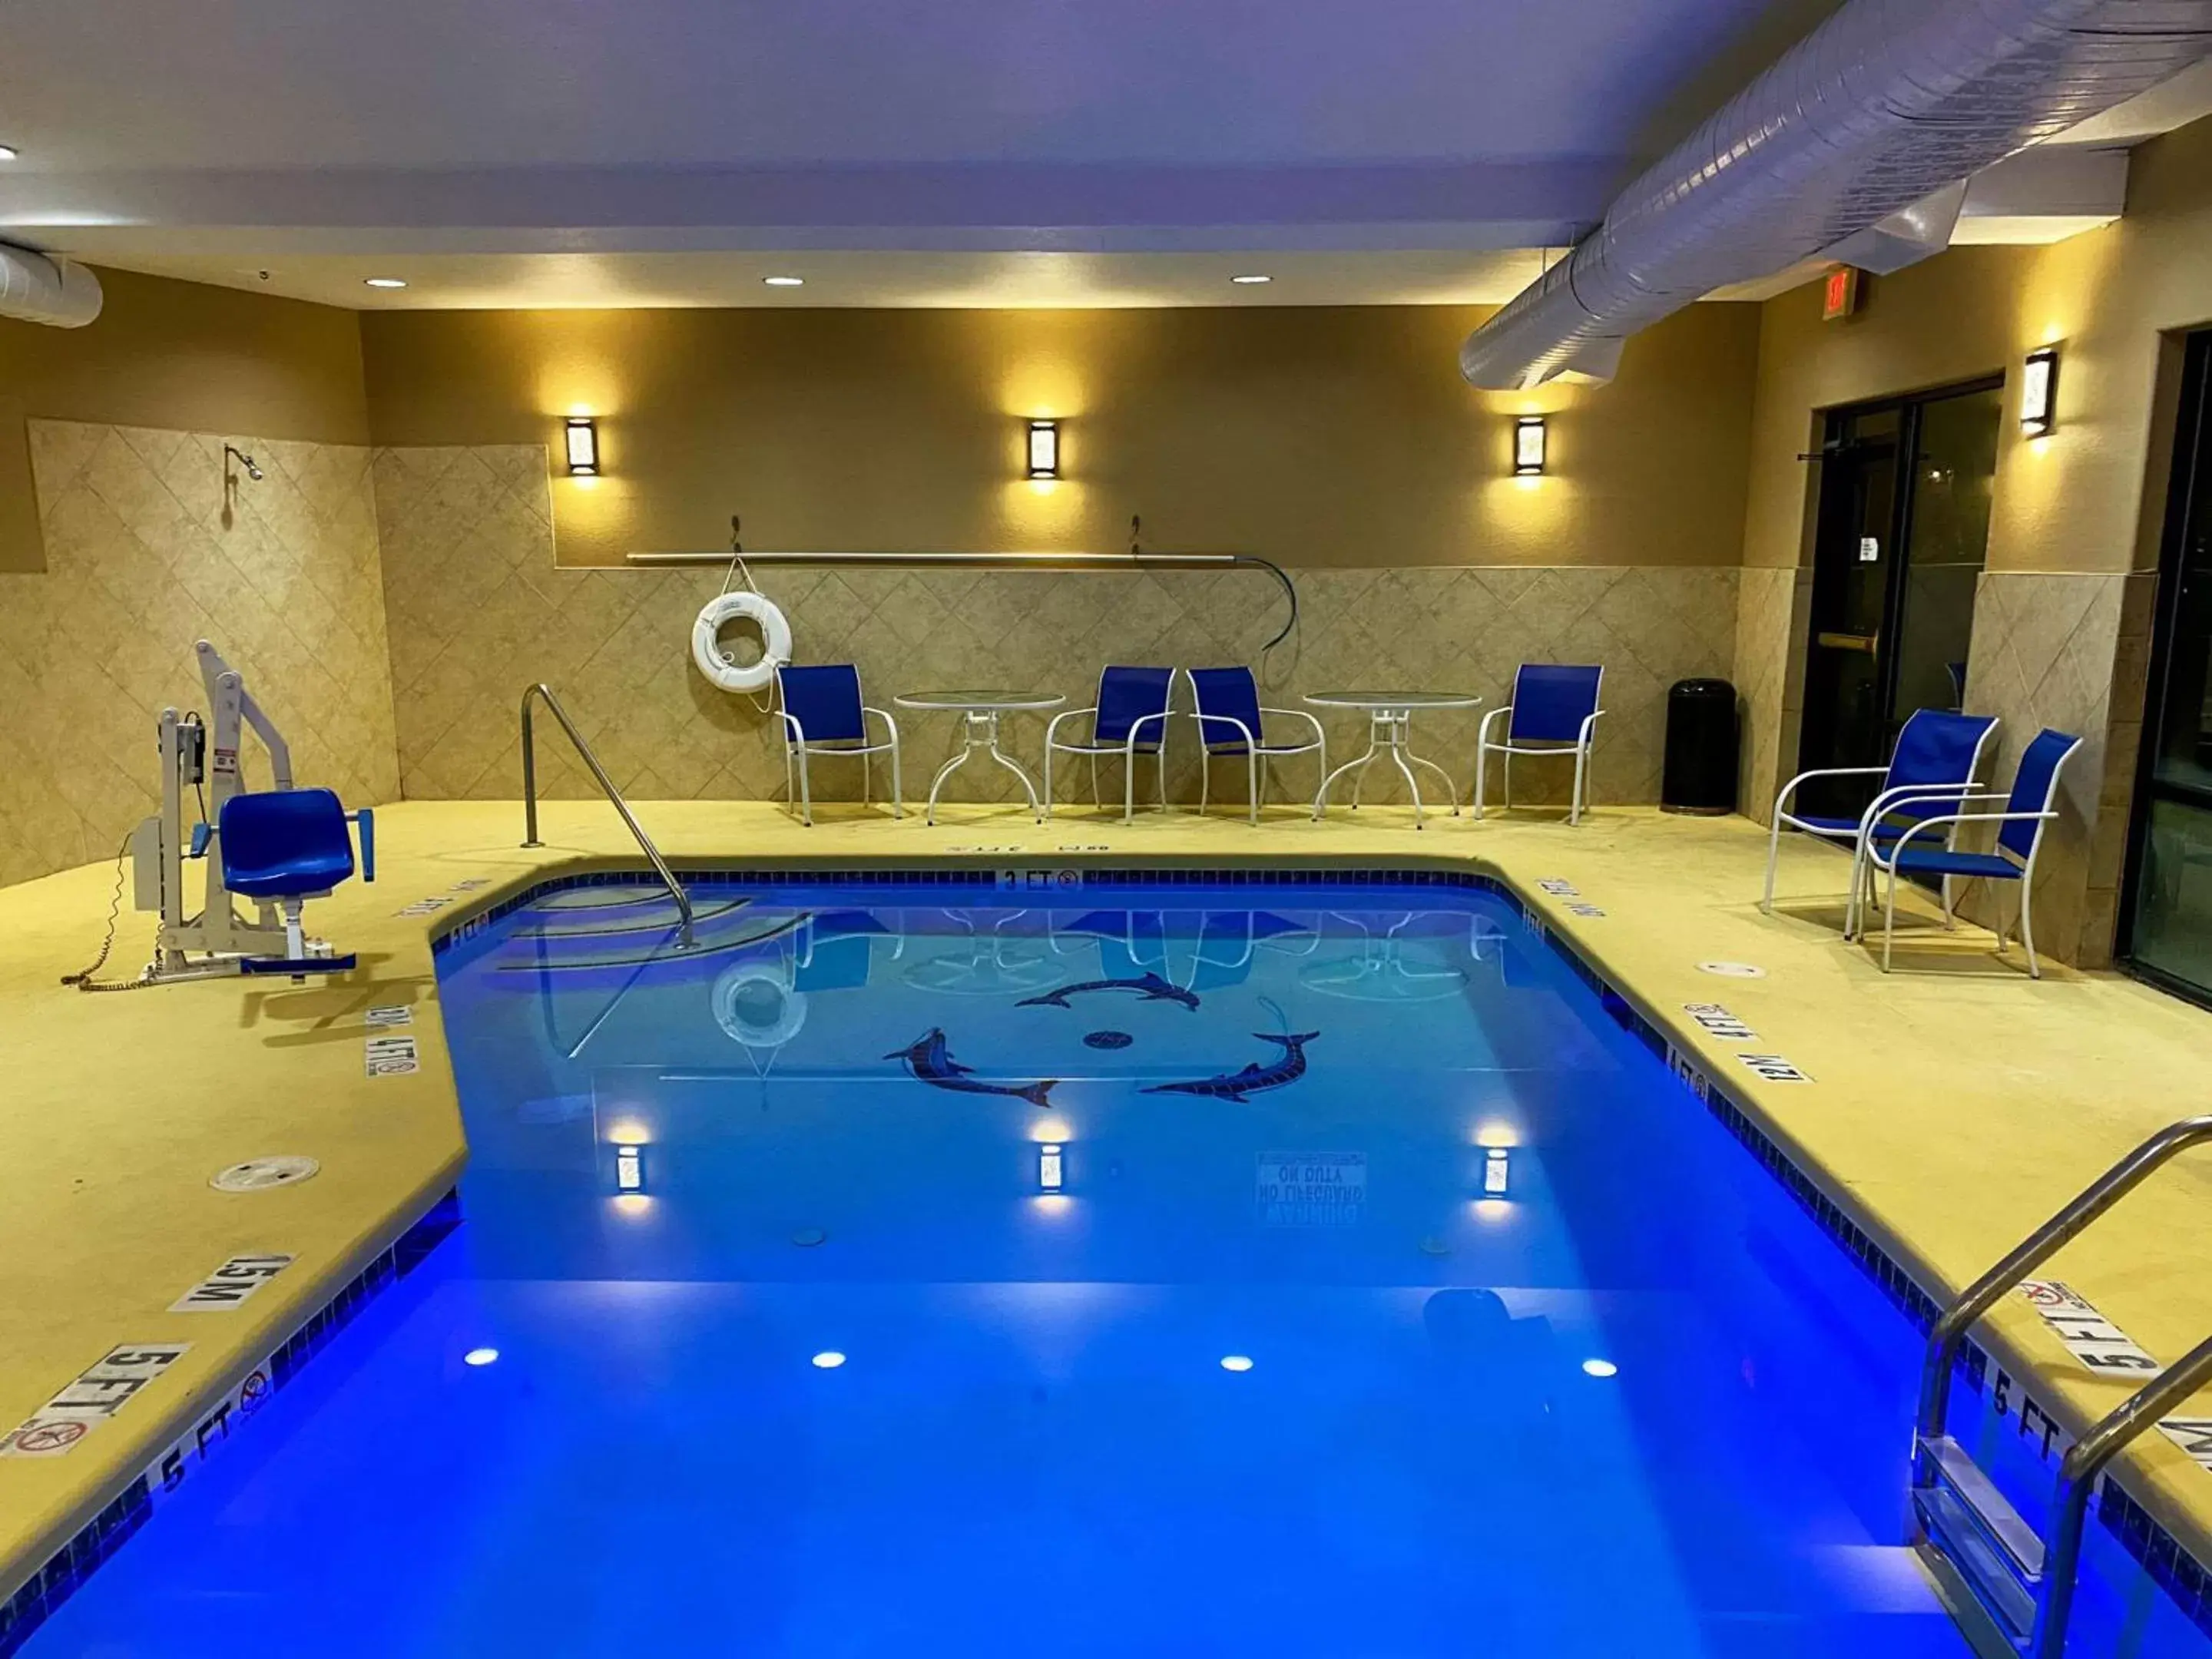 Swimming pool in Comfort Suites by Choice Hotels, Kingsland, I-95, Kings Bay Naval Base